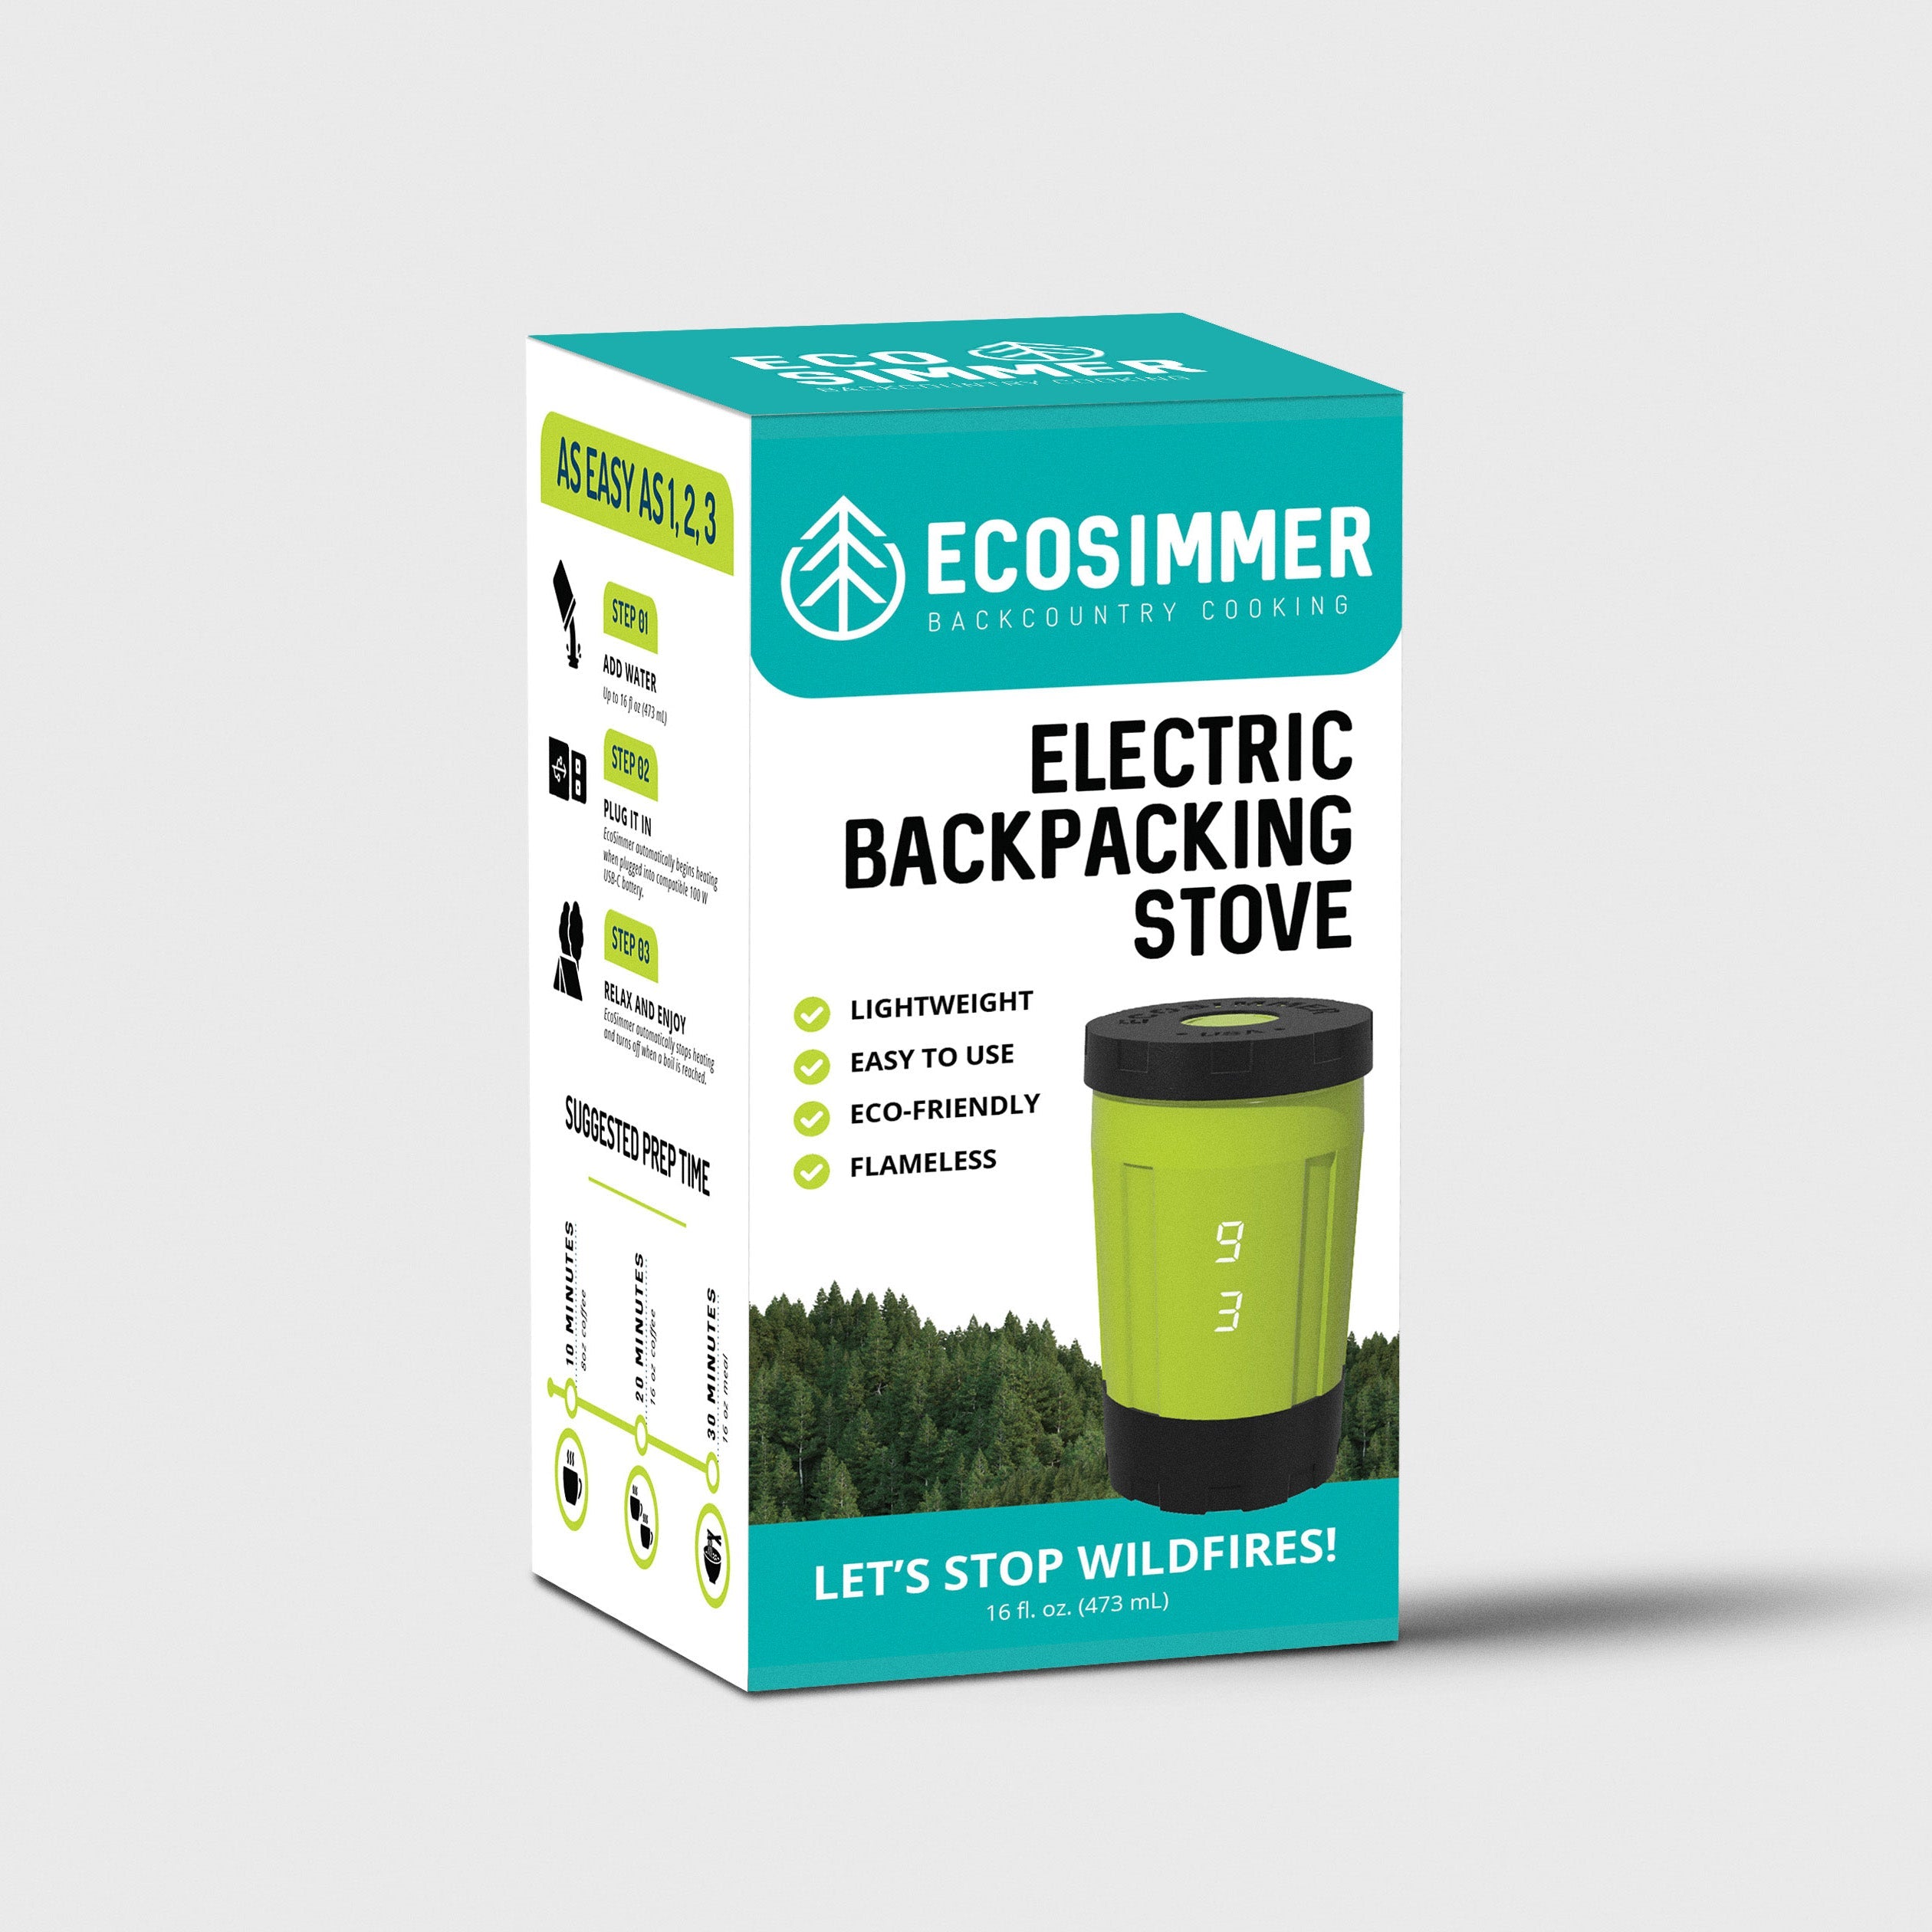 EcoSimmer electric backpacking stove packaging displaying front and side displaying let's stop wildfires and as easy as 1, 2, 3